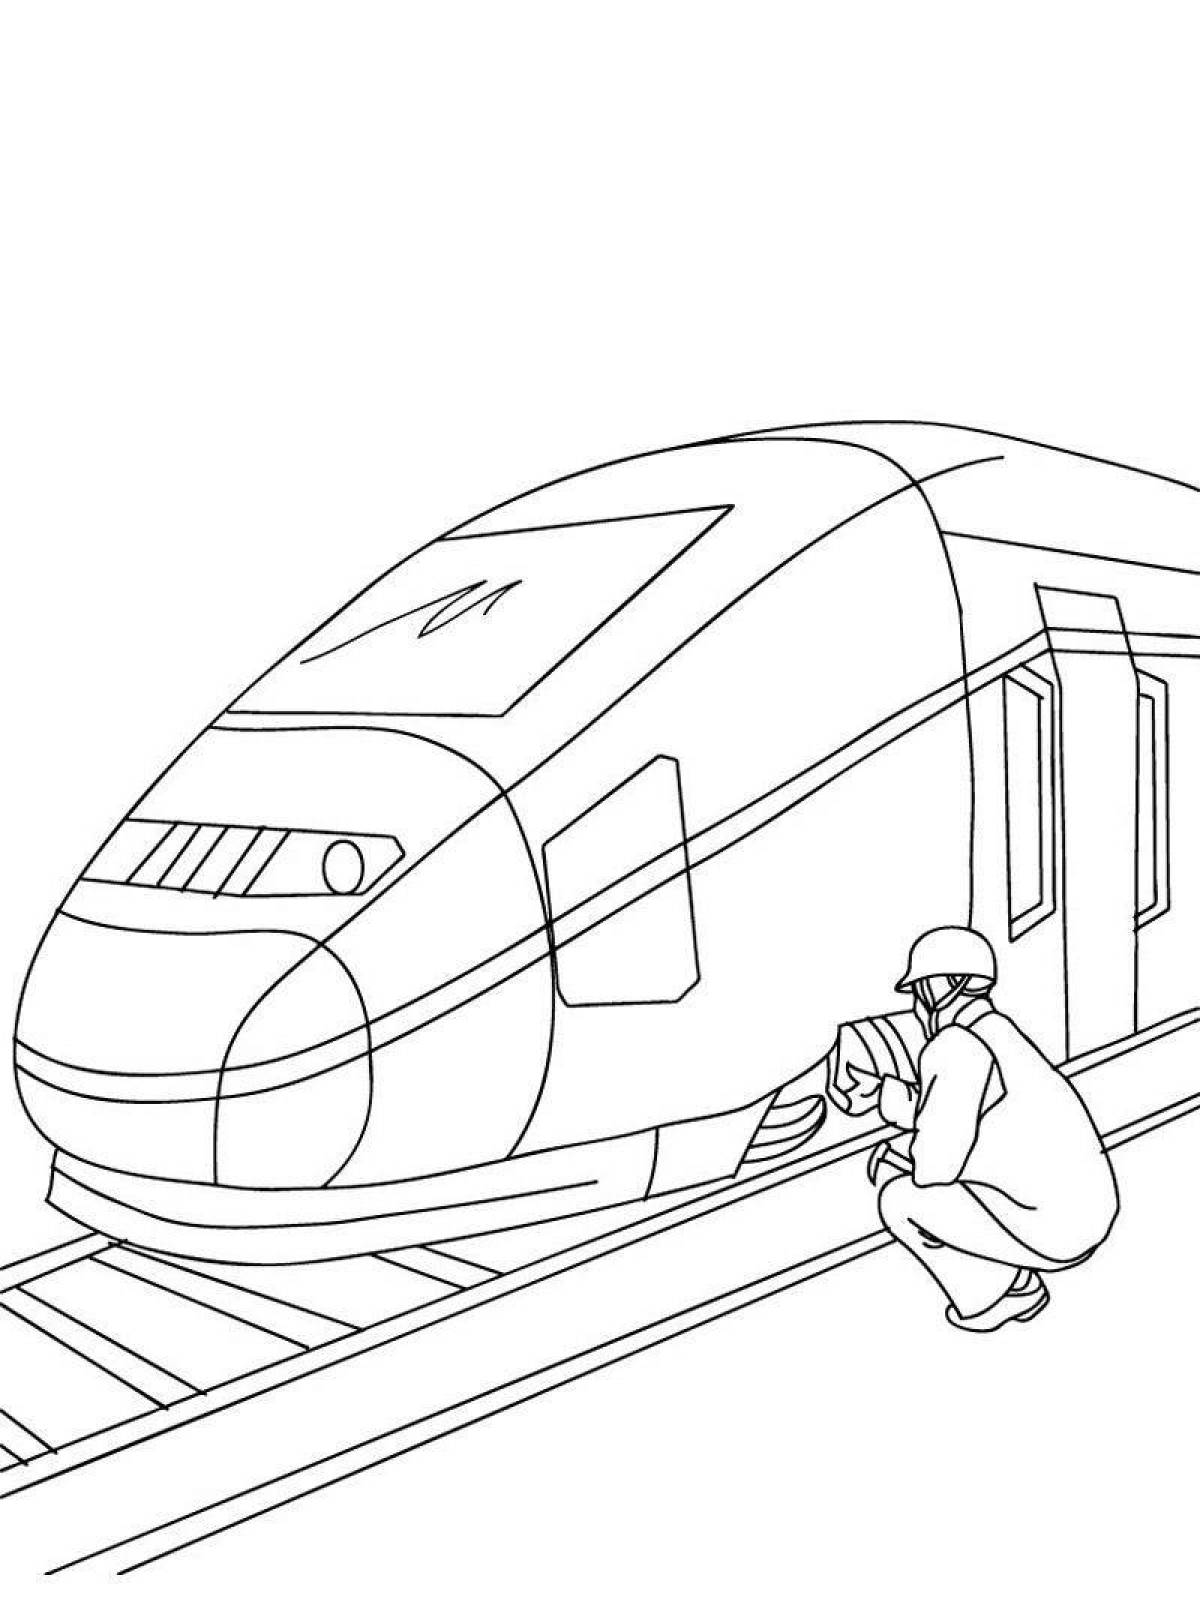 Amazing electric train coloring page